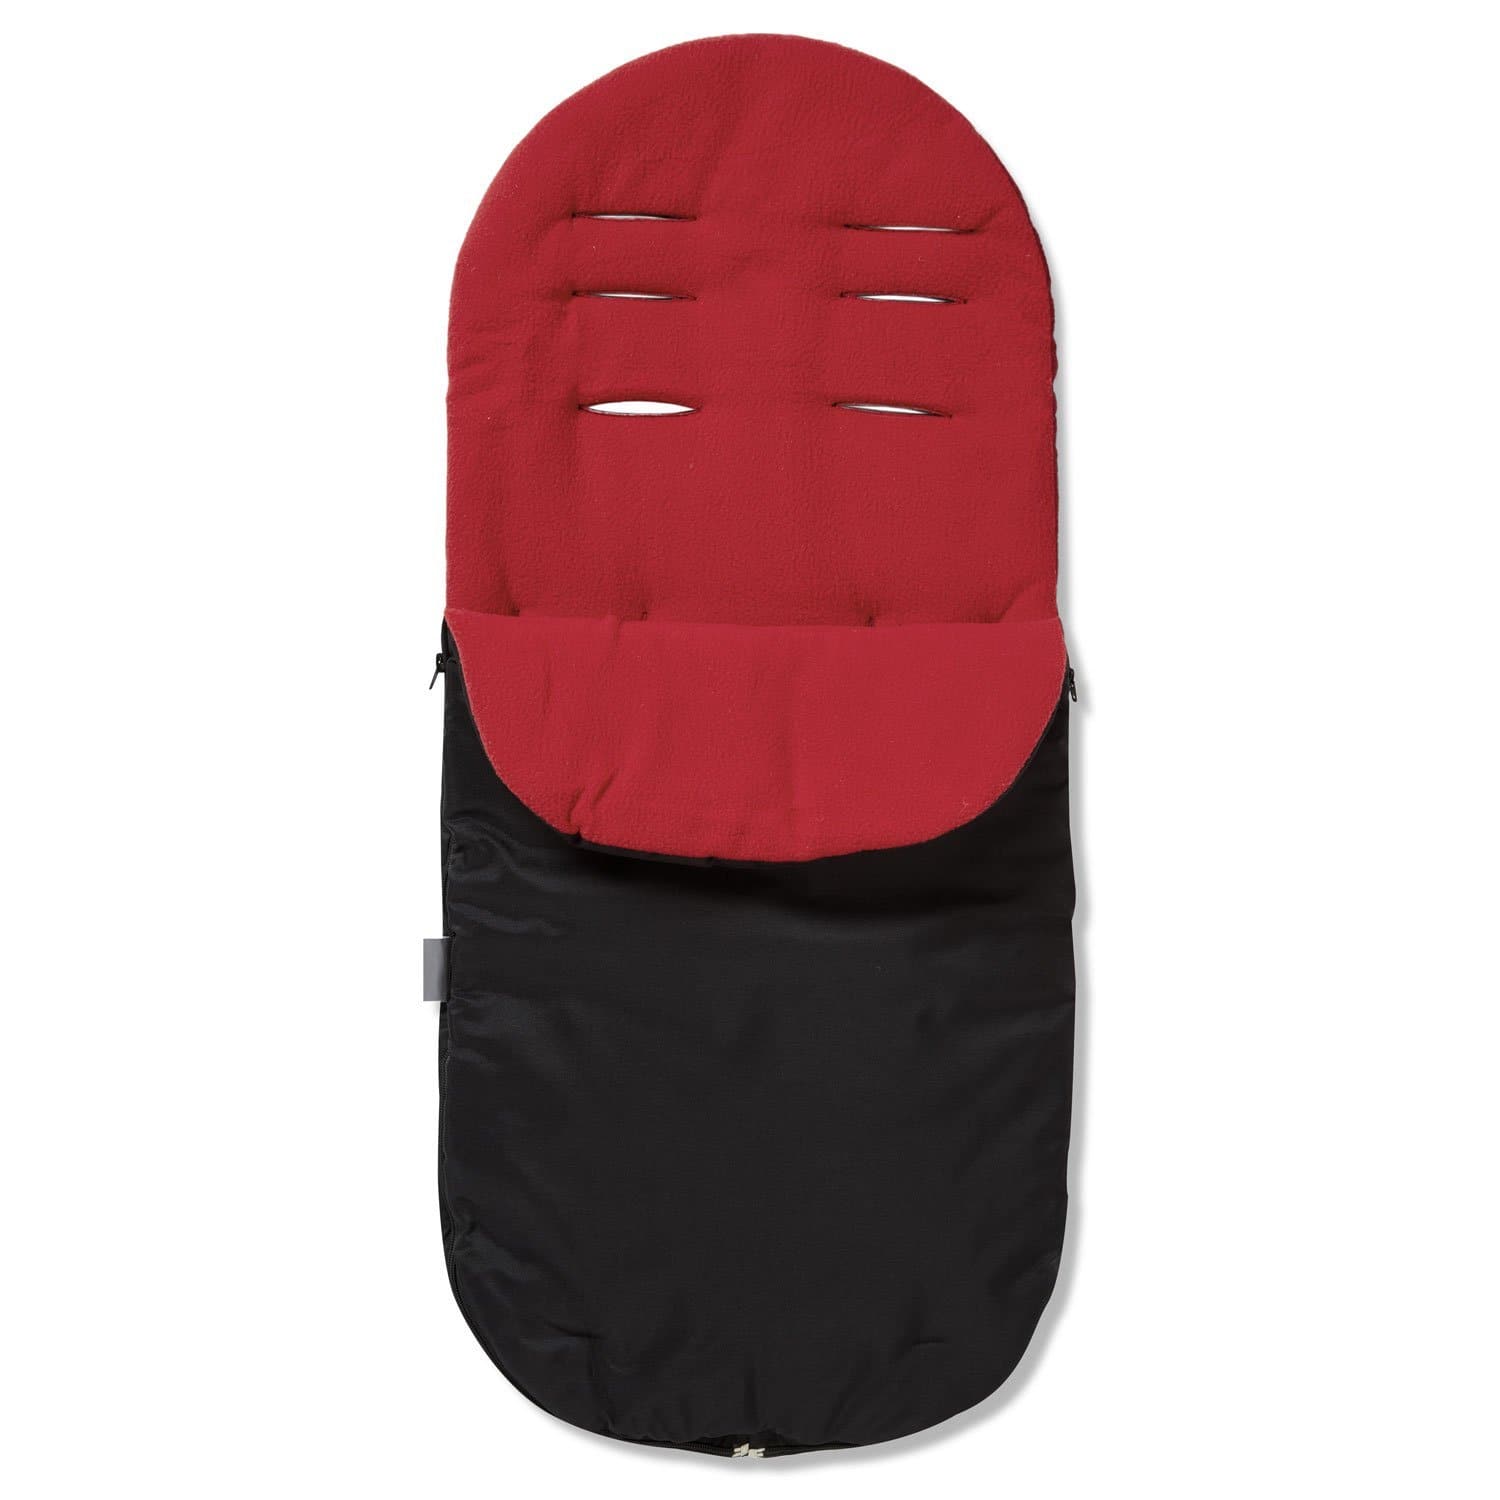 Footmuff / Cosy Toes Compatible with Pericles - Red / Fits All Models | For Your Little One